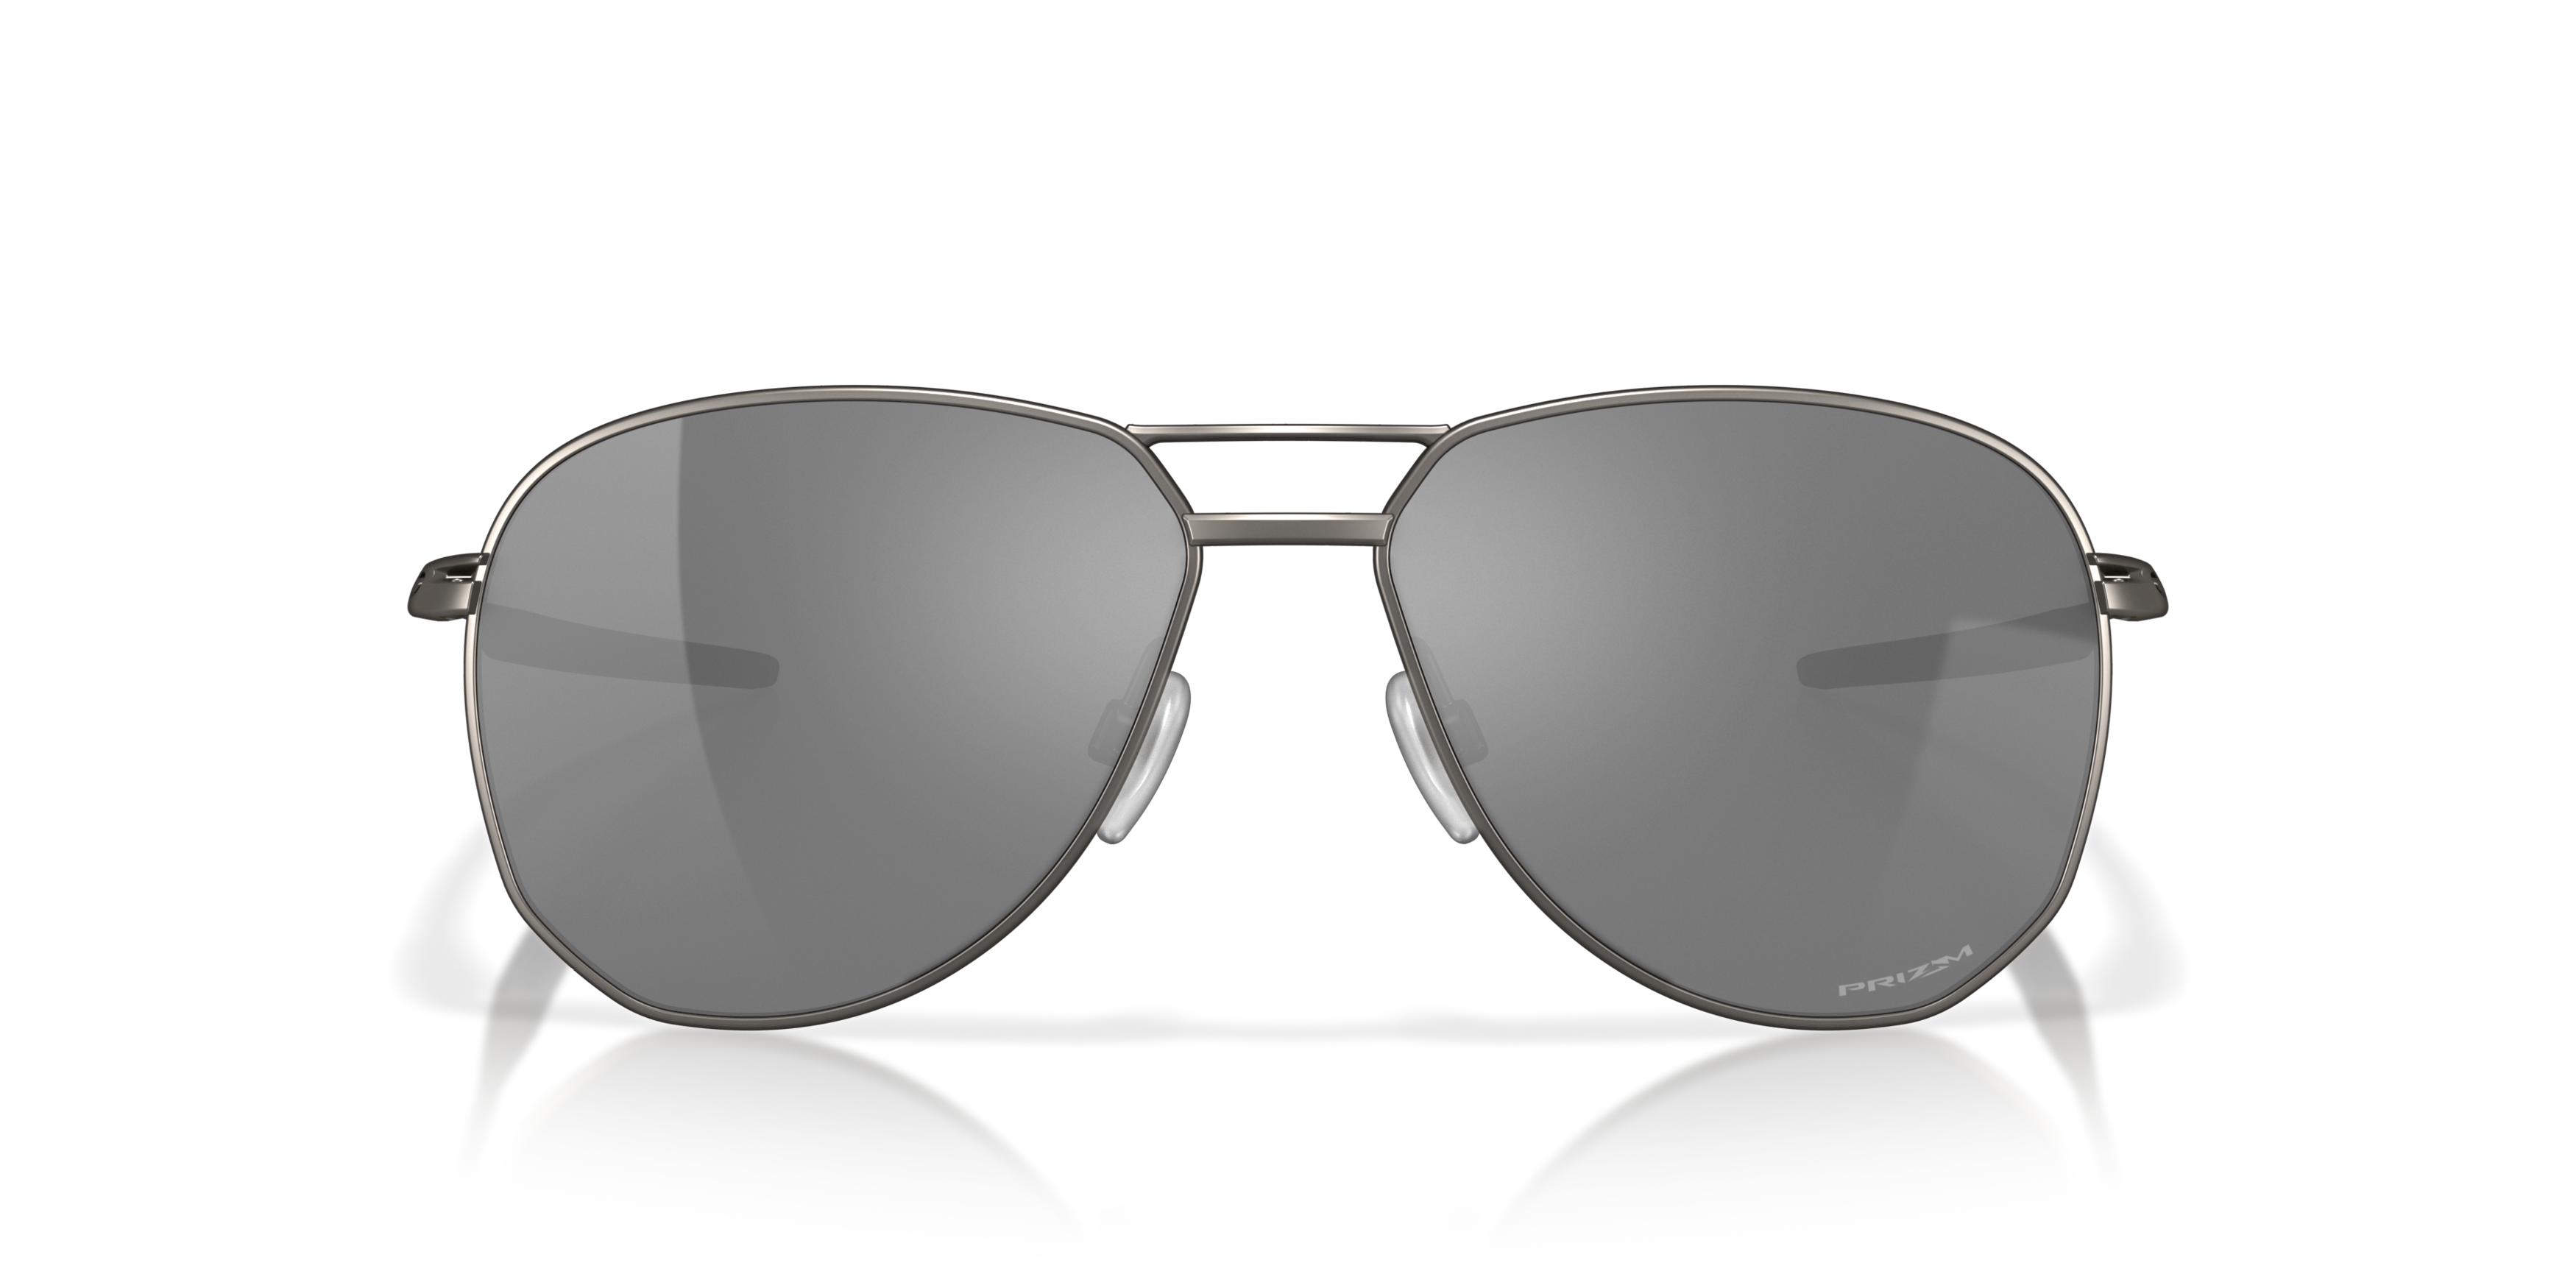 [products.image.front] OAKLEY OO4147 414702